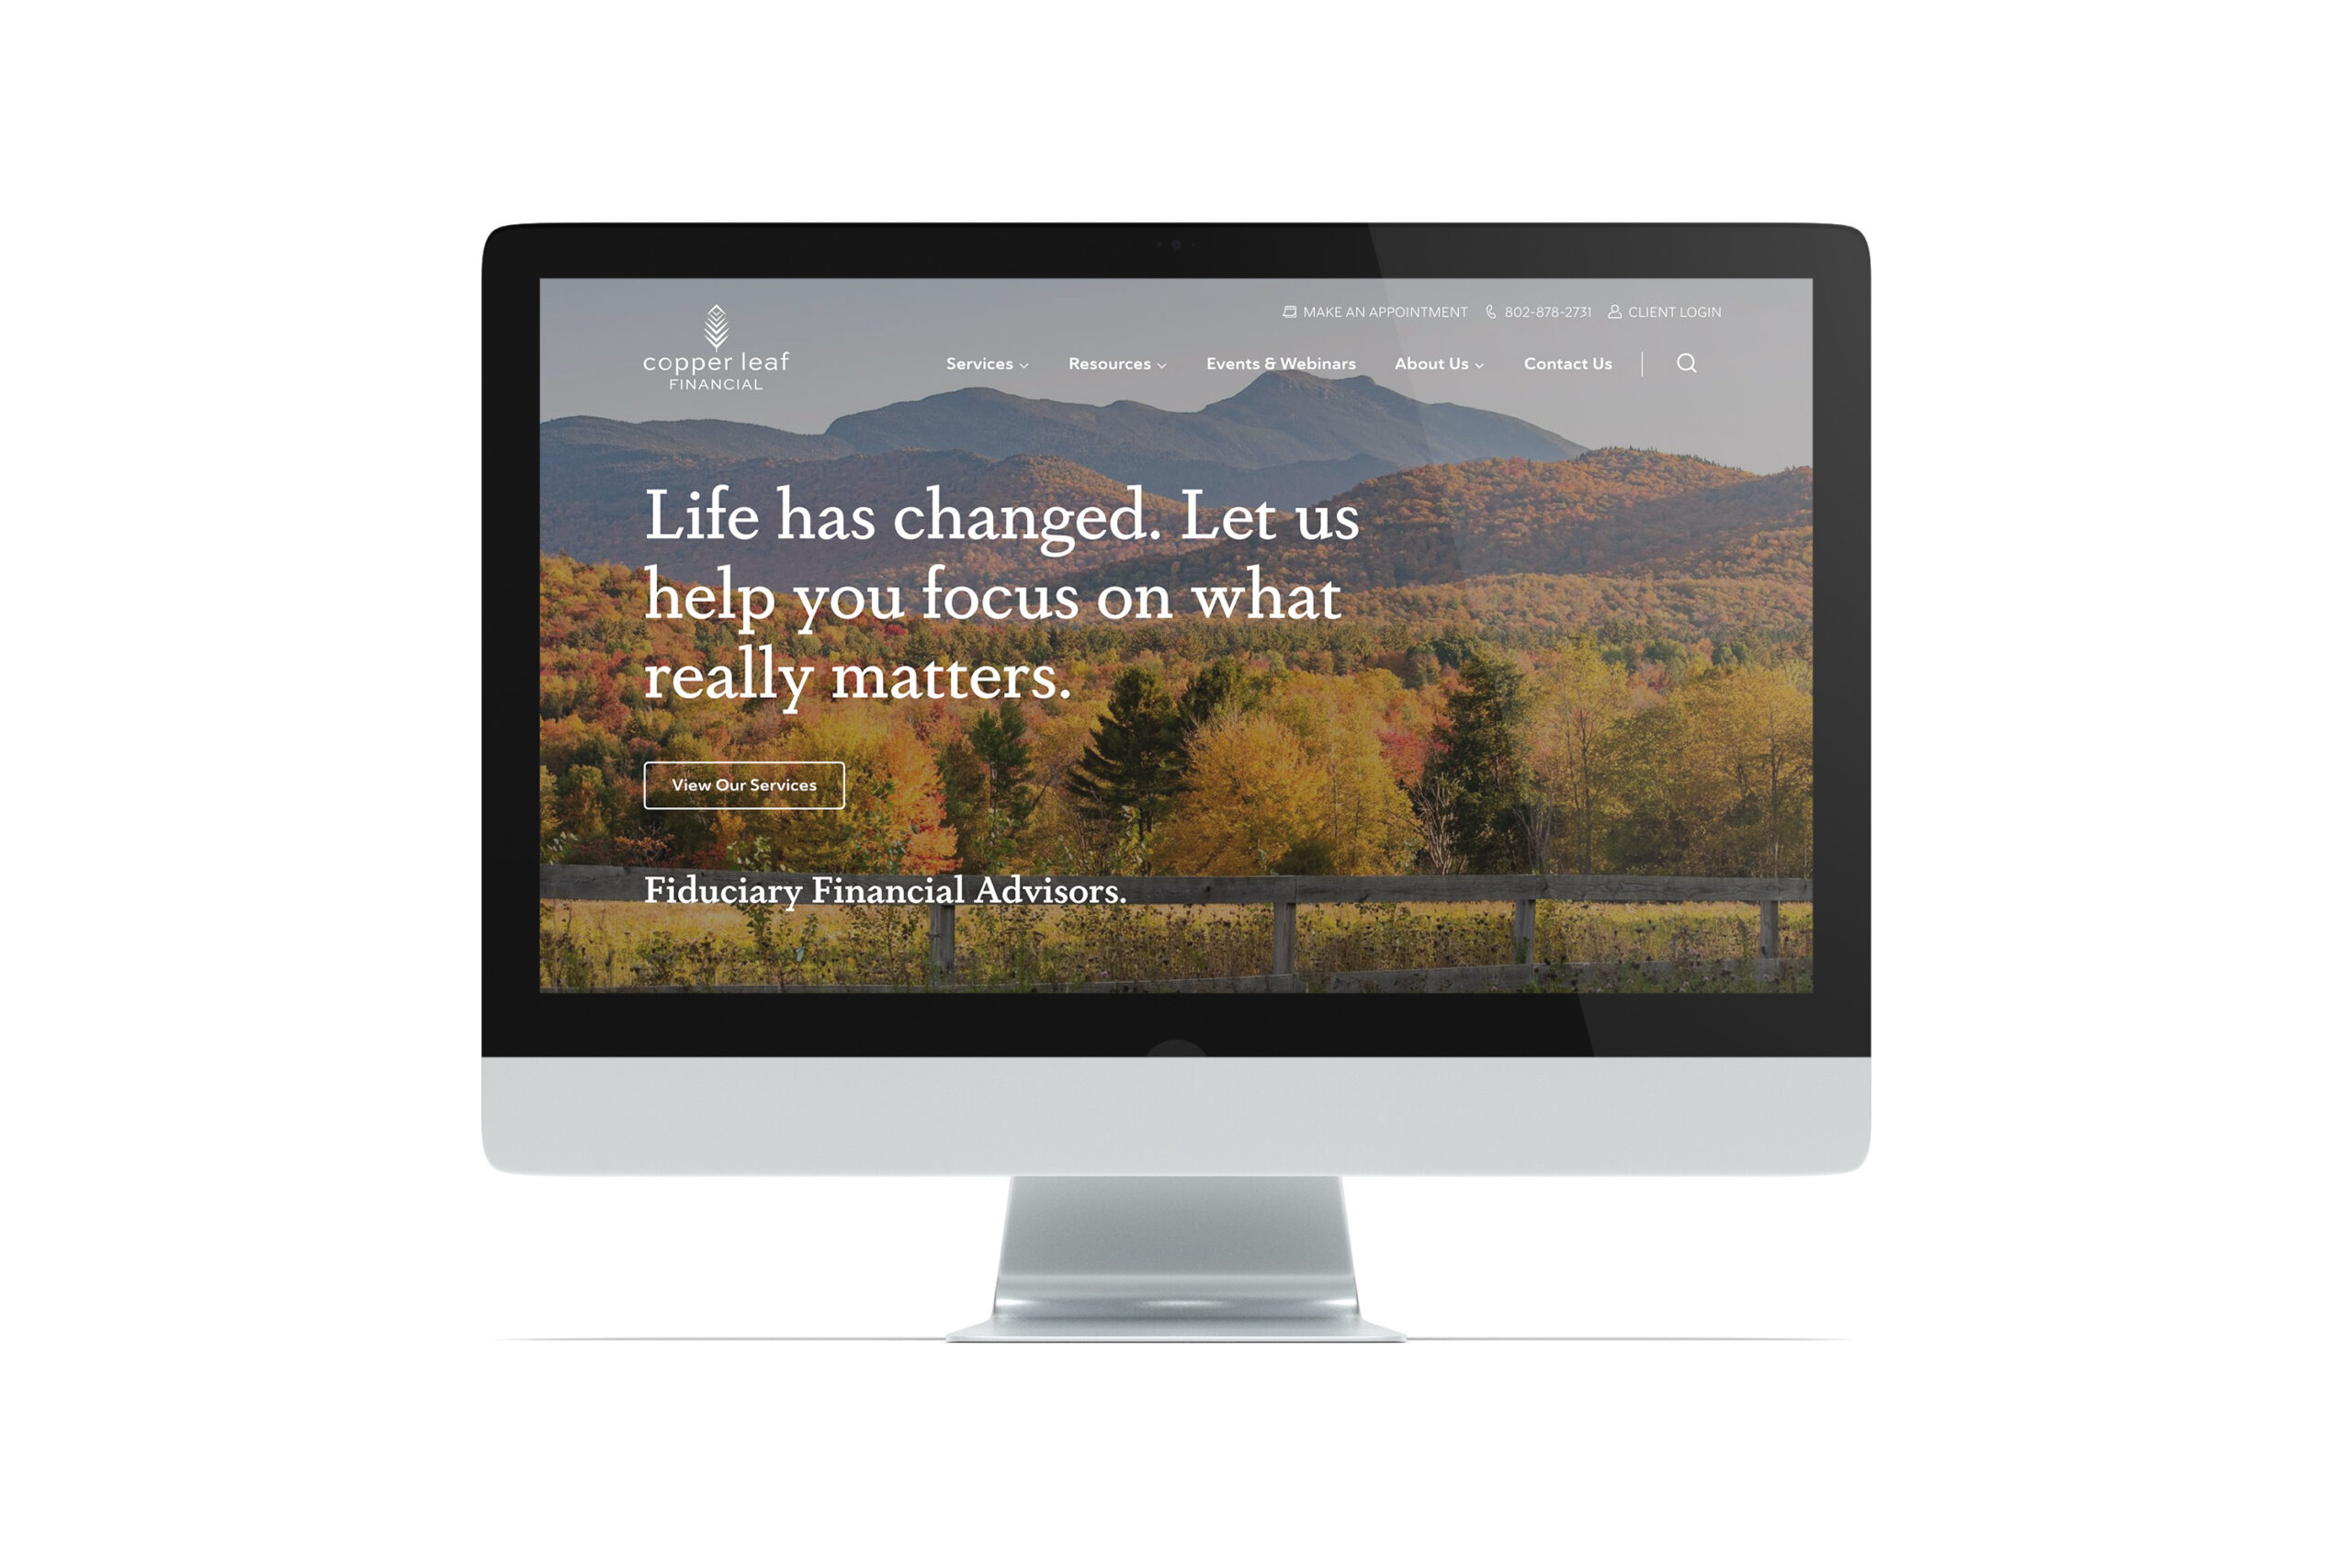 The new Copper Leaf Financial website homepage on a desktop computer